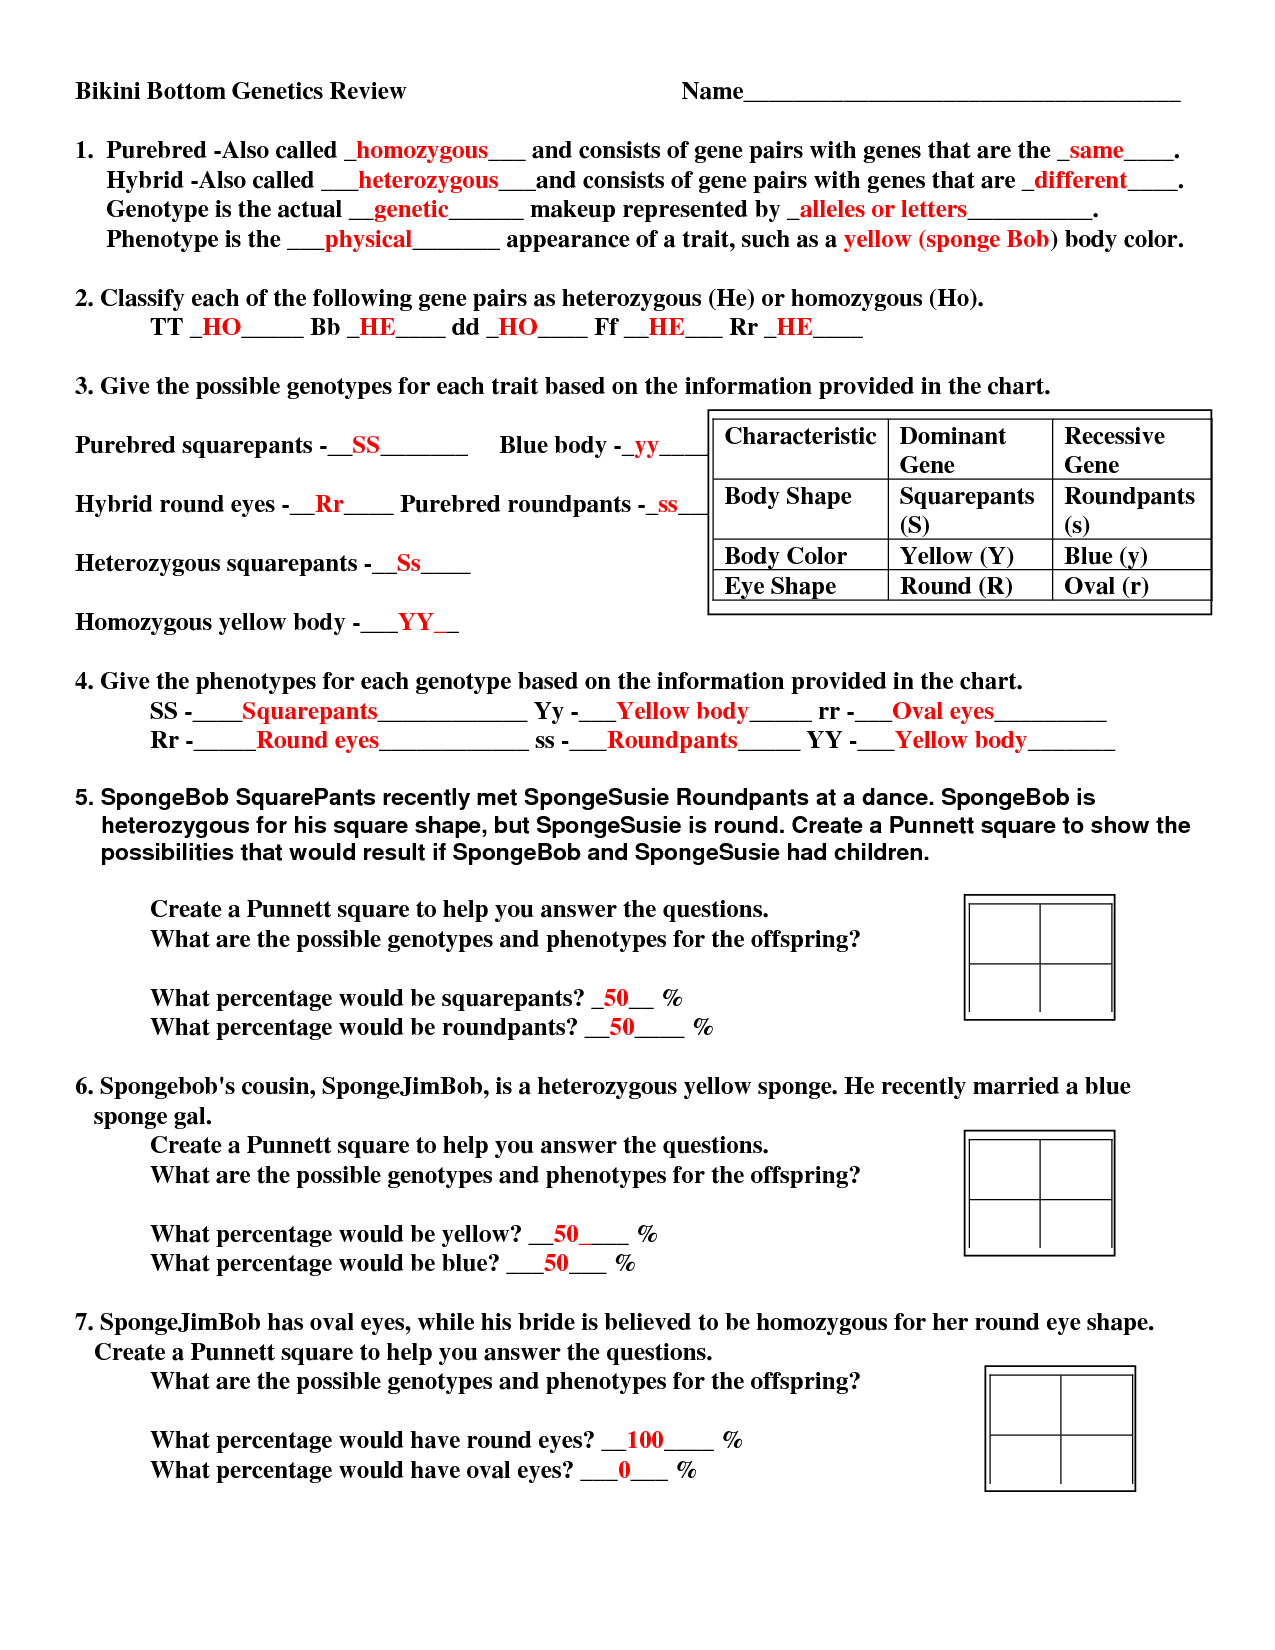 15-best-images-of-genetic-punnett-squares-worksheets-worksheet-template-tips-and-reviews